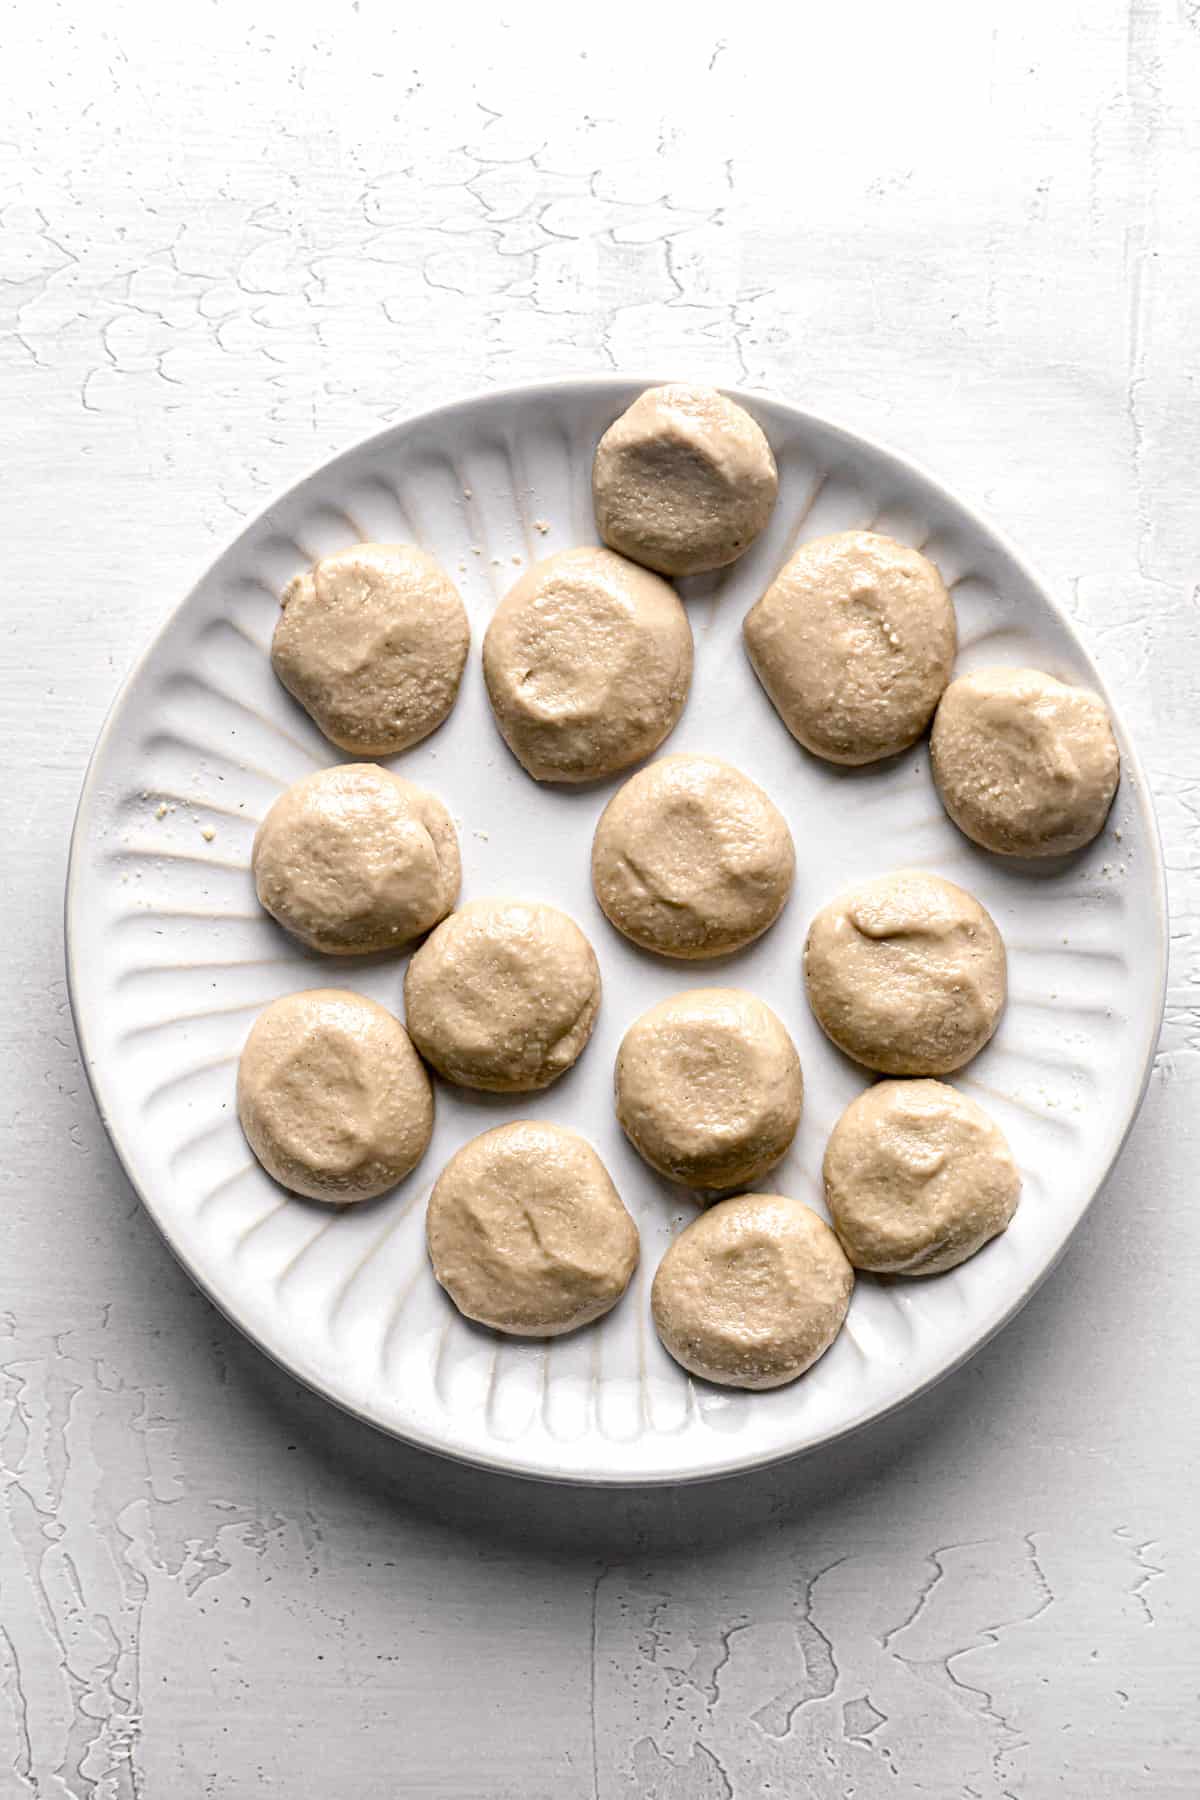 tahini filling shaped into disks on white plate